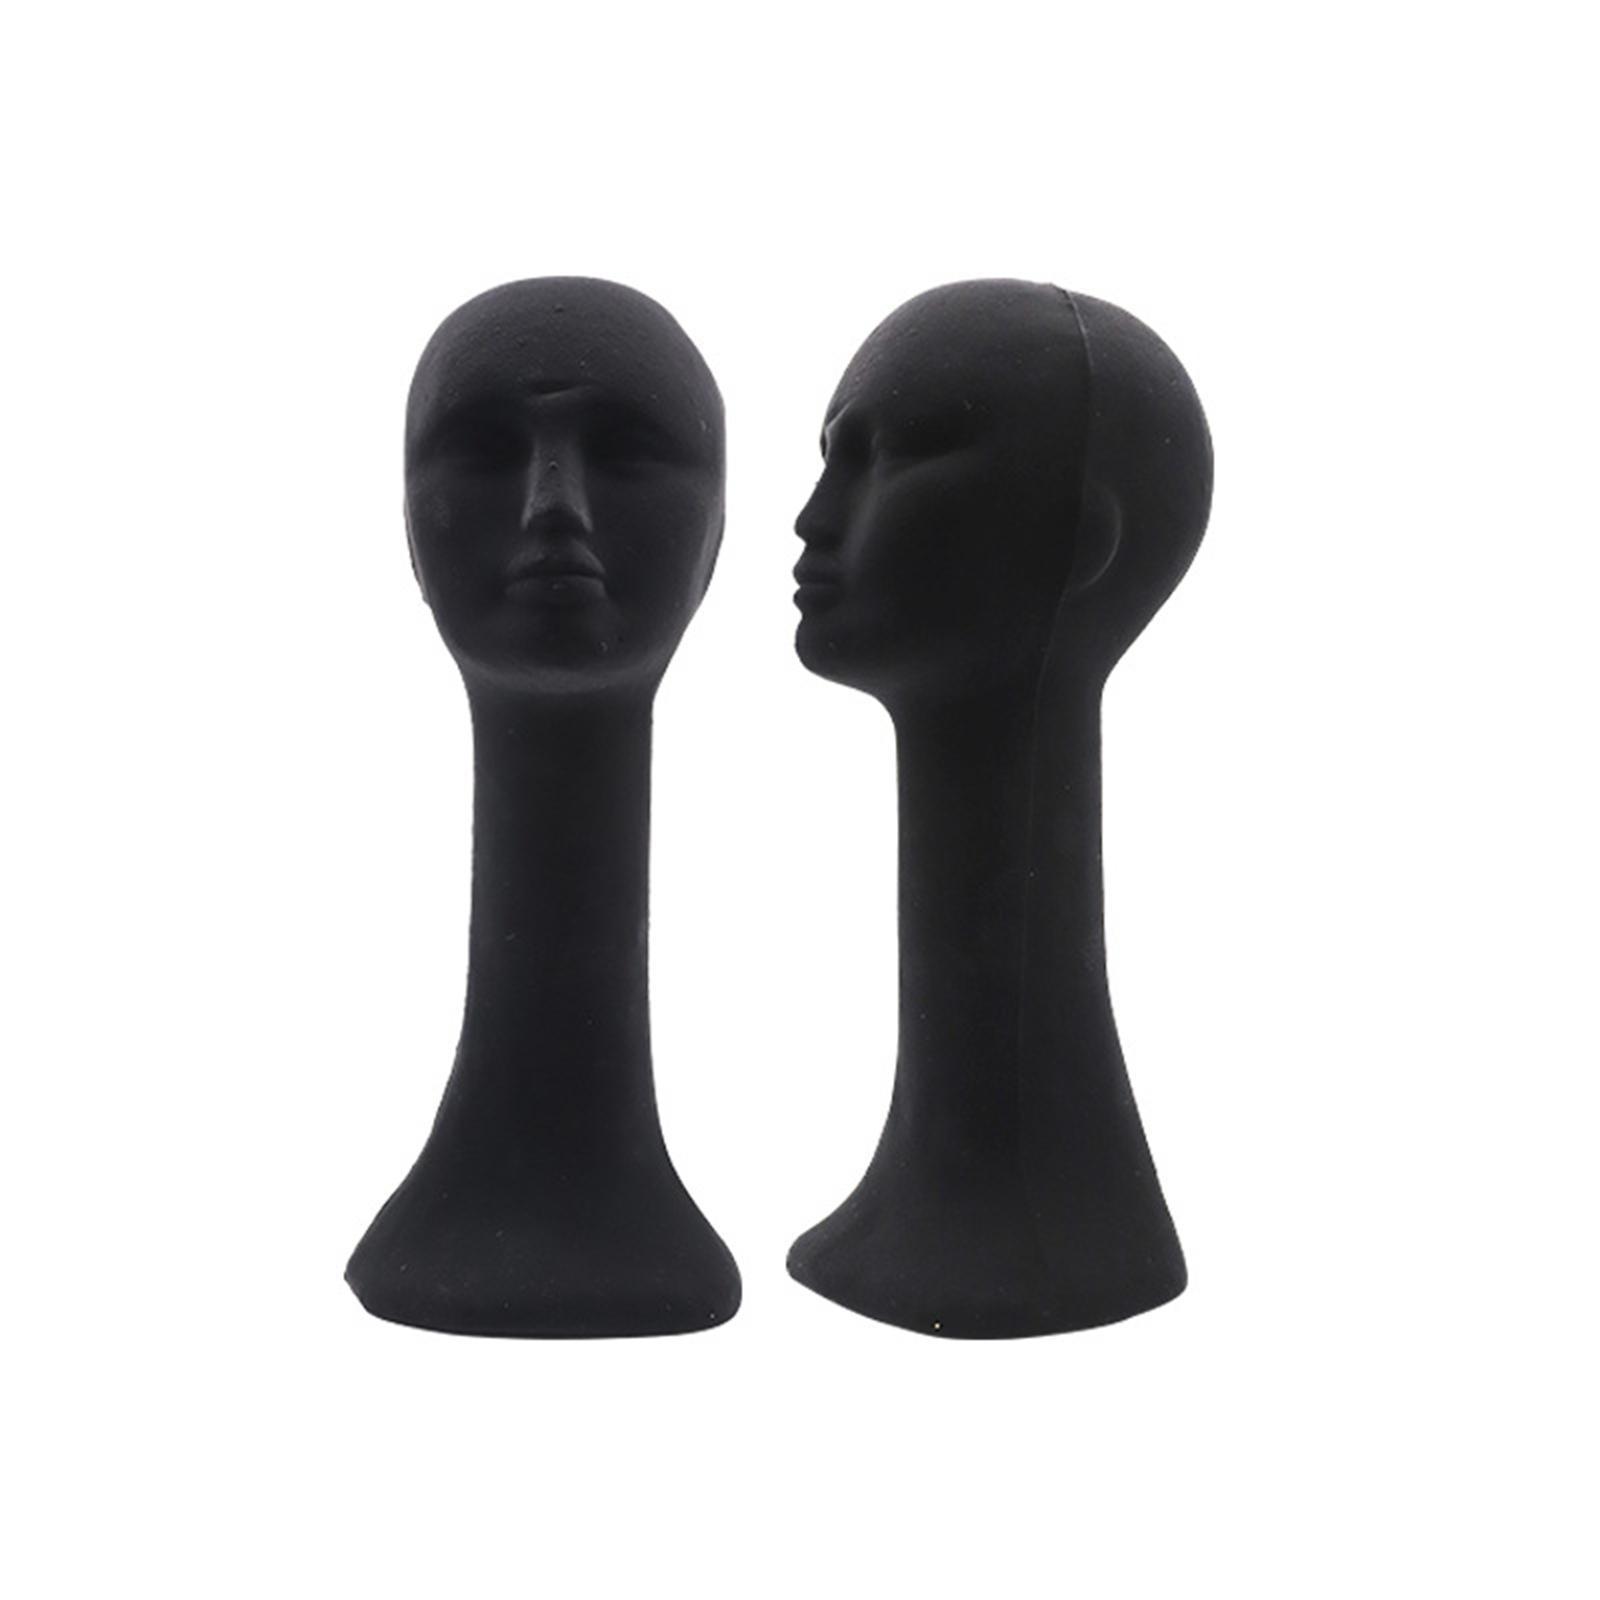 Women Wig Head Display Foam Head Model Stand Mannequin High Simulation DIY Photography Props